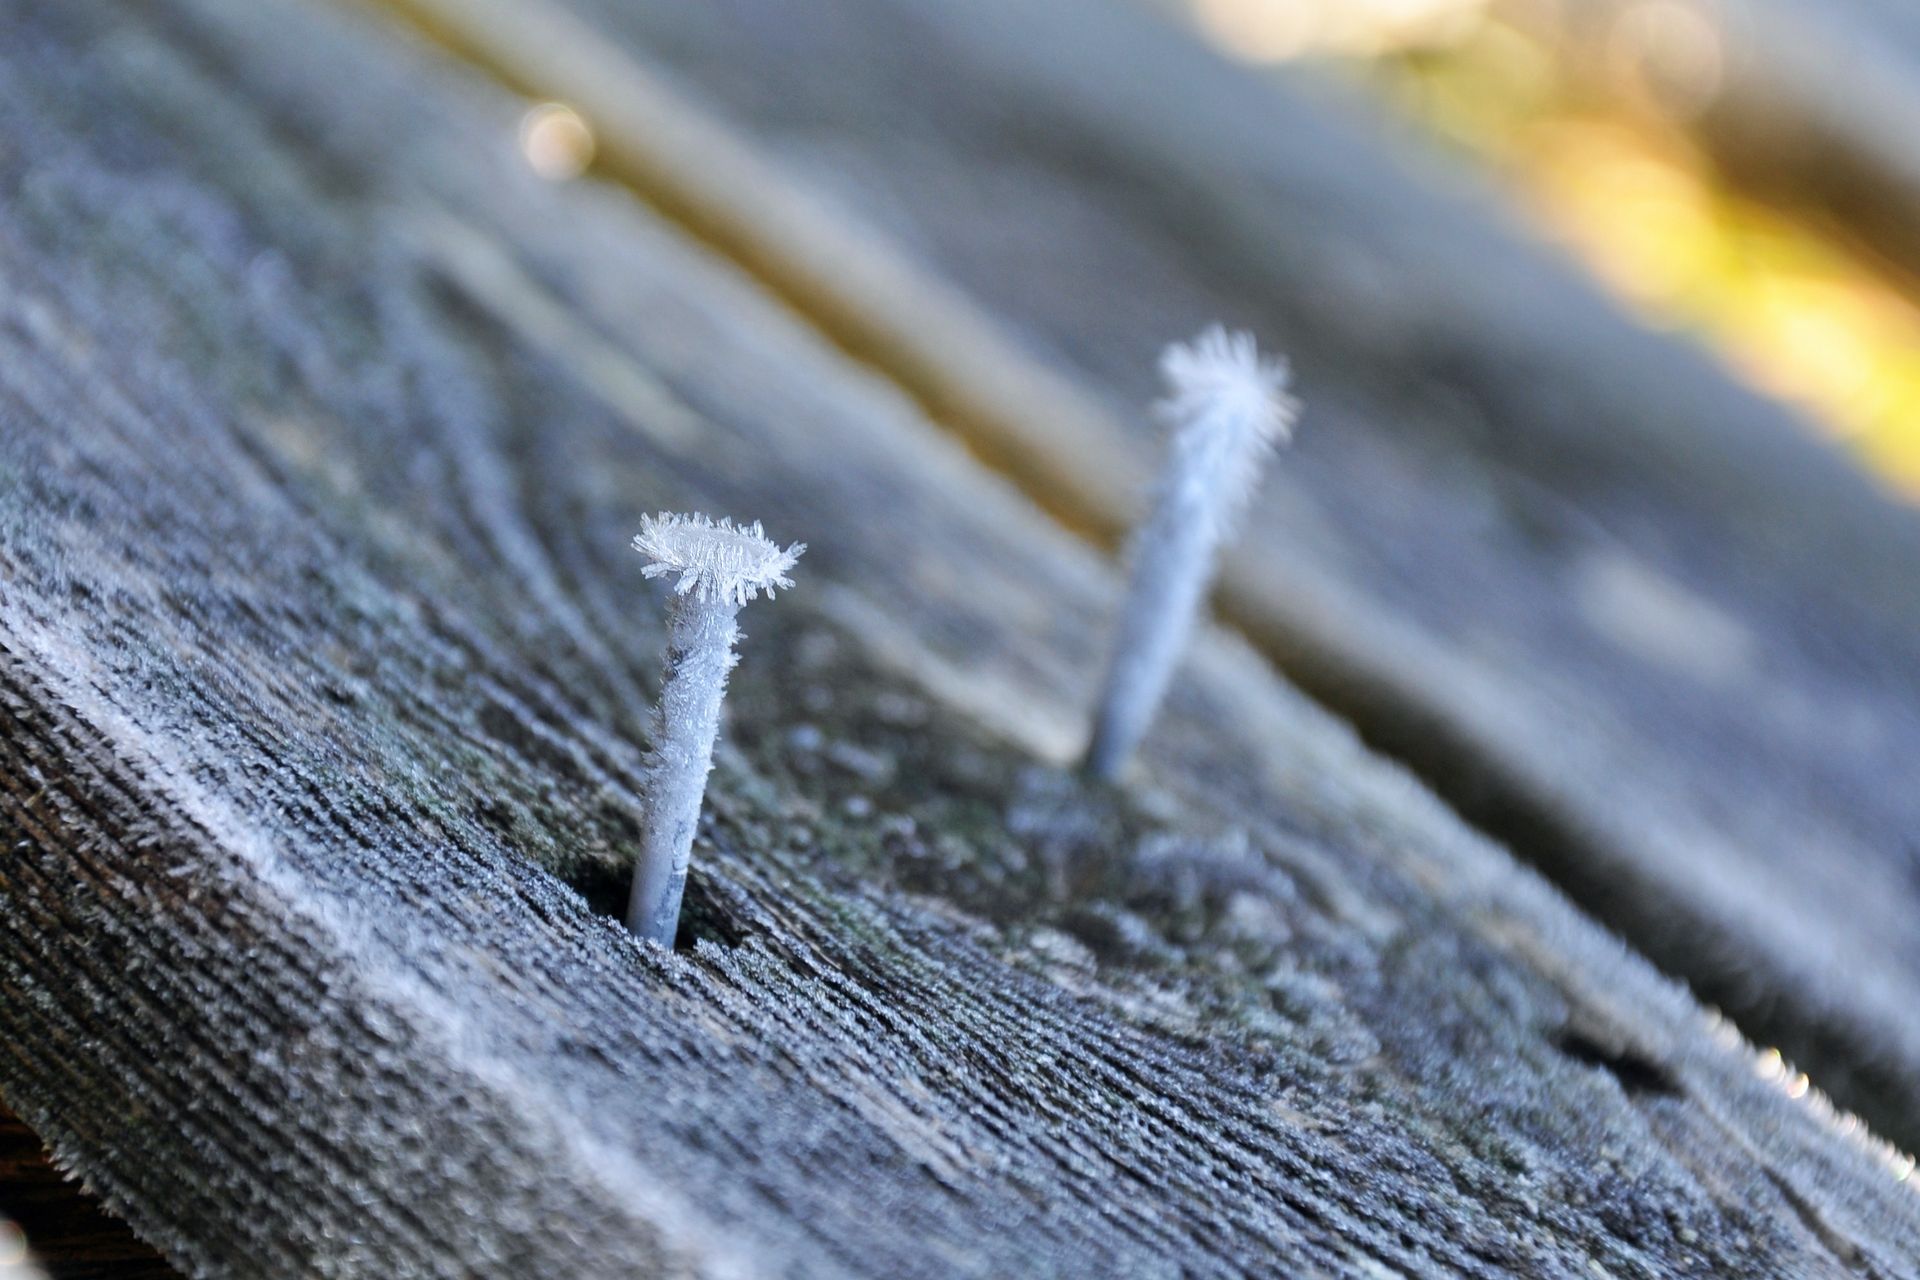 A set of frost-covered nails in a wooden board.